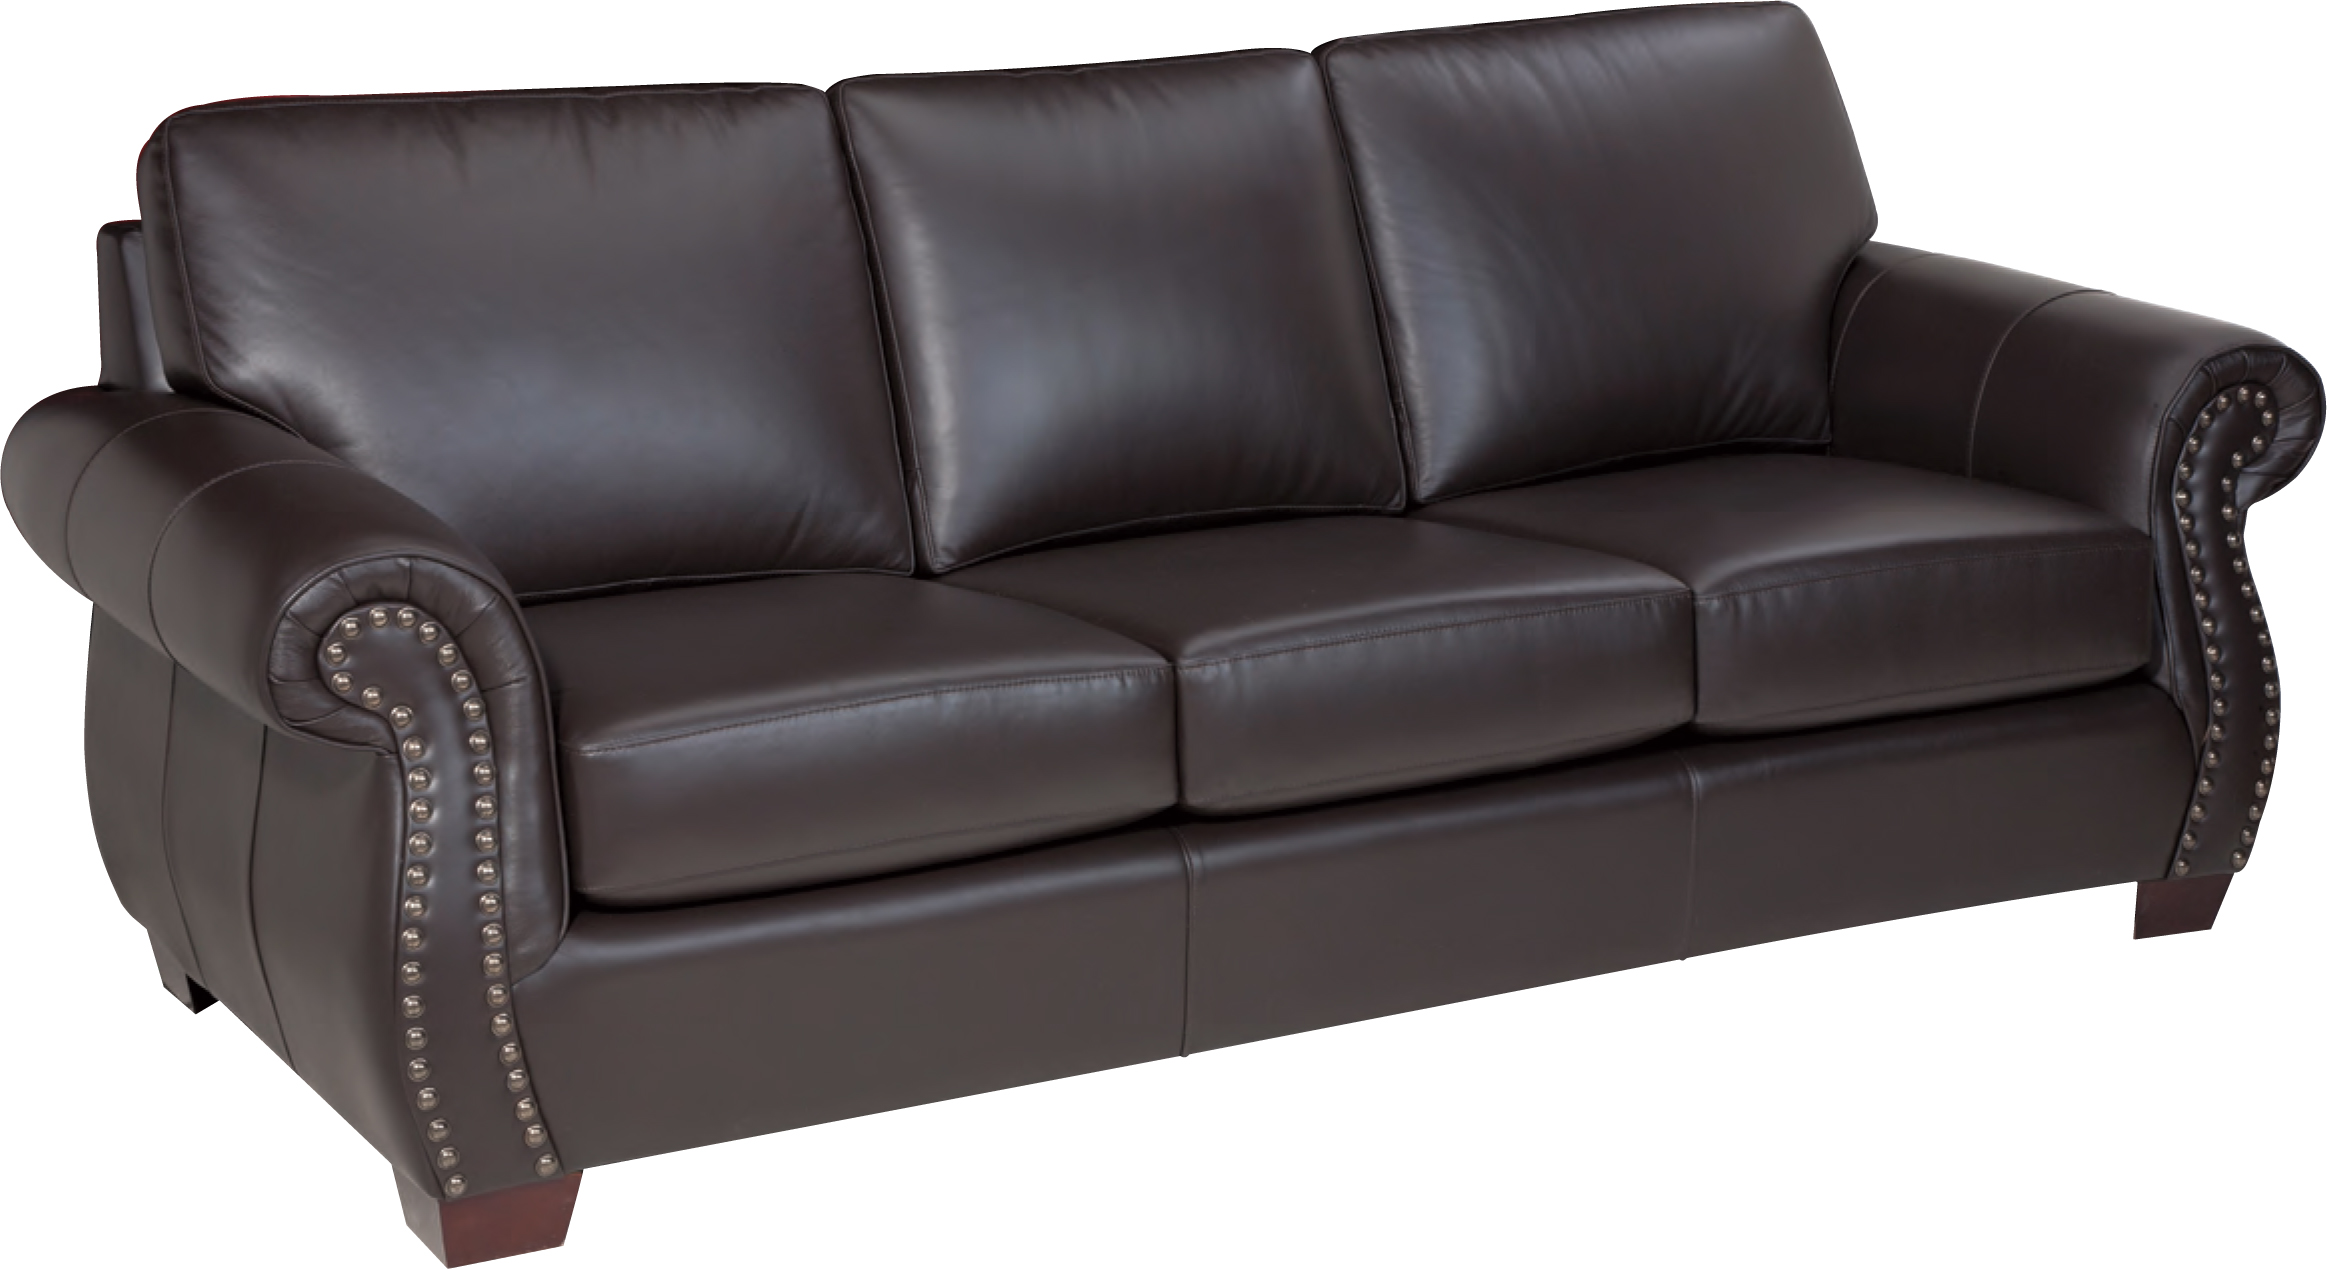 leather craft sofa with nailheads